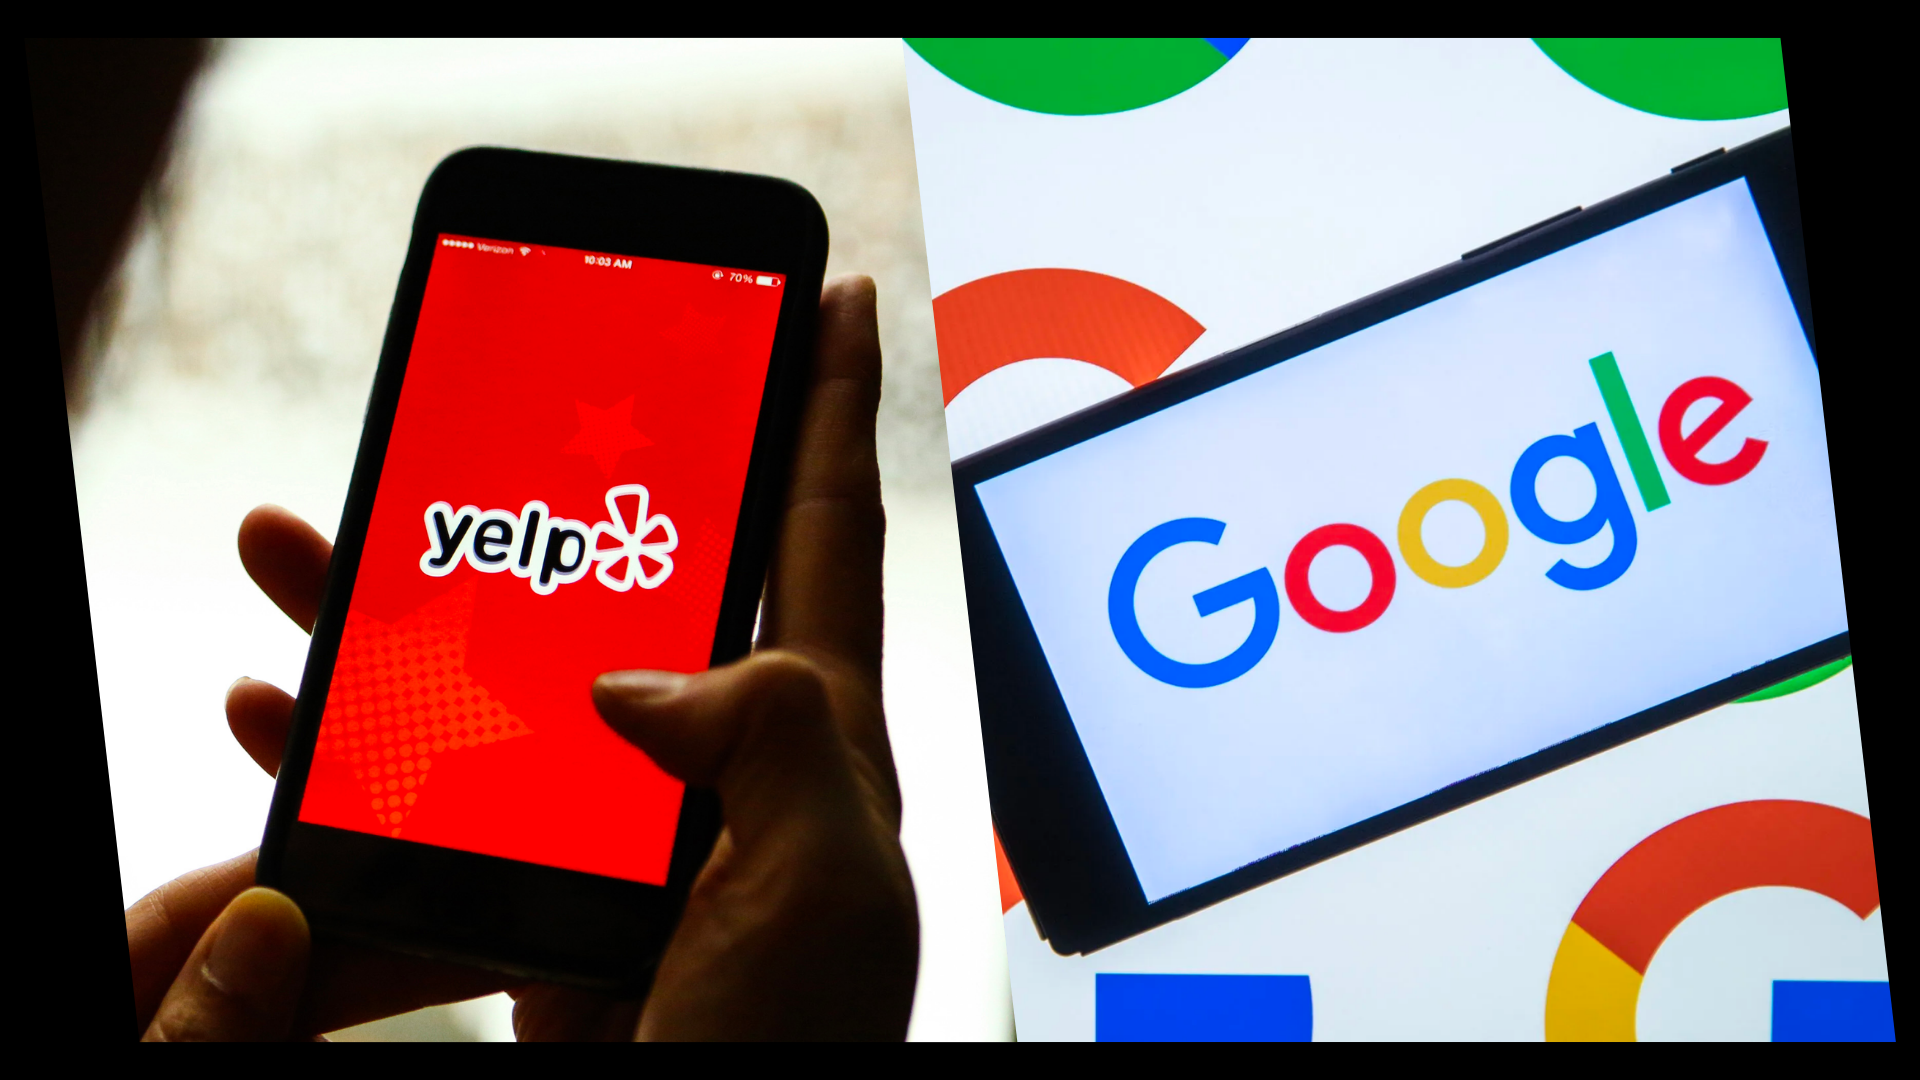 Yelp’s Research Challenges Effectiveness of Google’s Compliance with EU Regulations